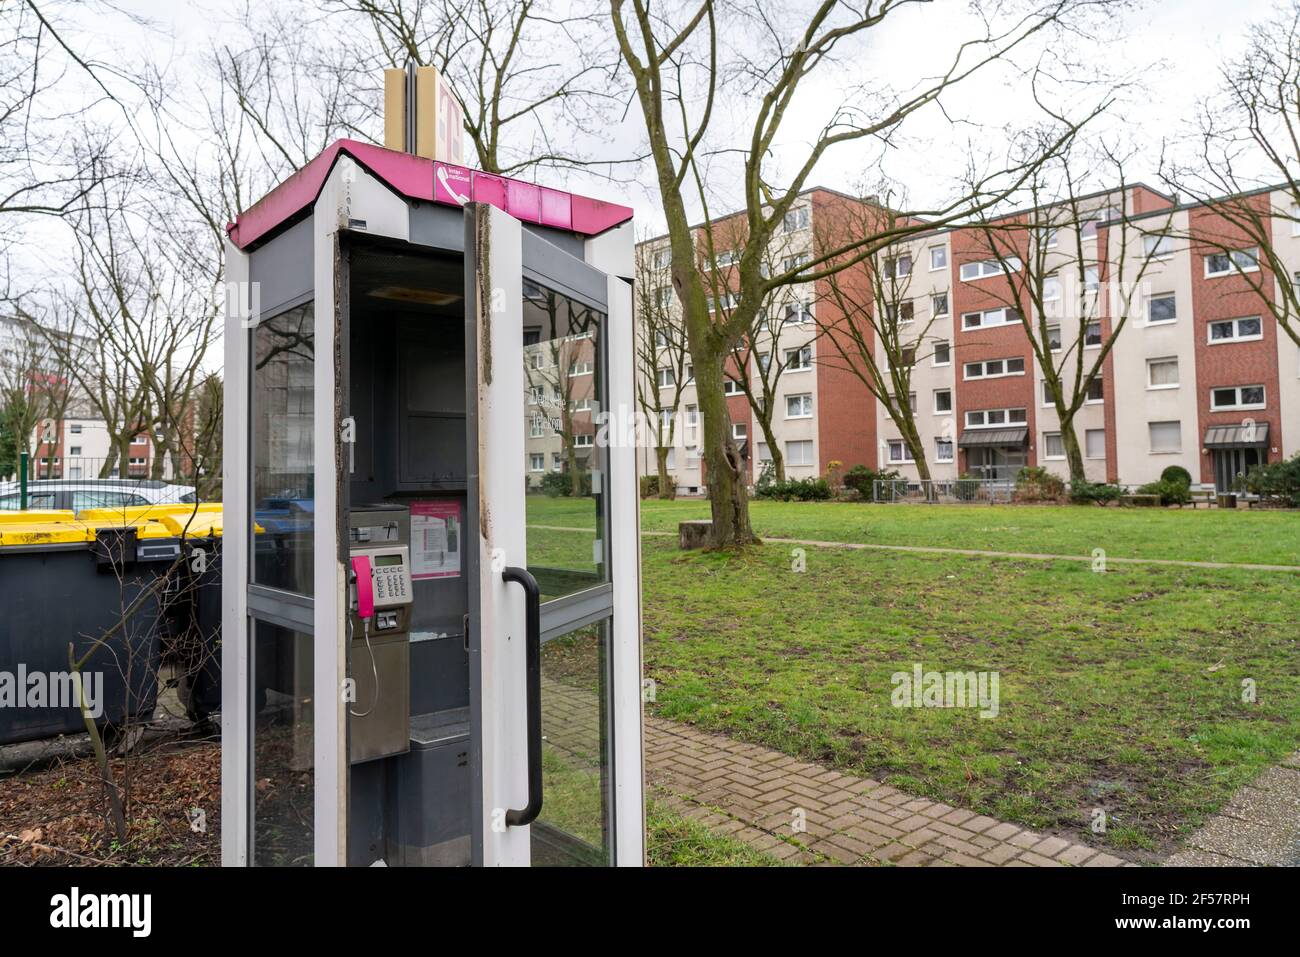 Deutsche Telekom telephone booth in the Hochheide district of Duisburg, NRW, Germany, Stock Photo